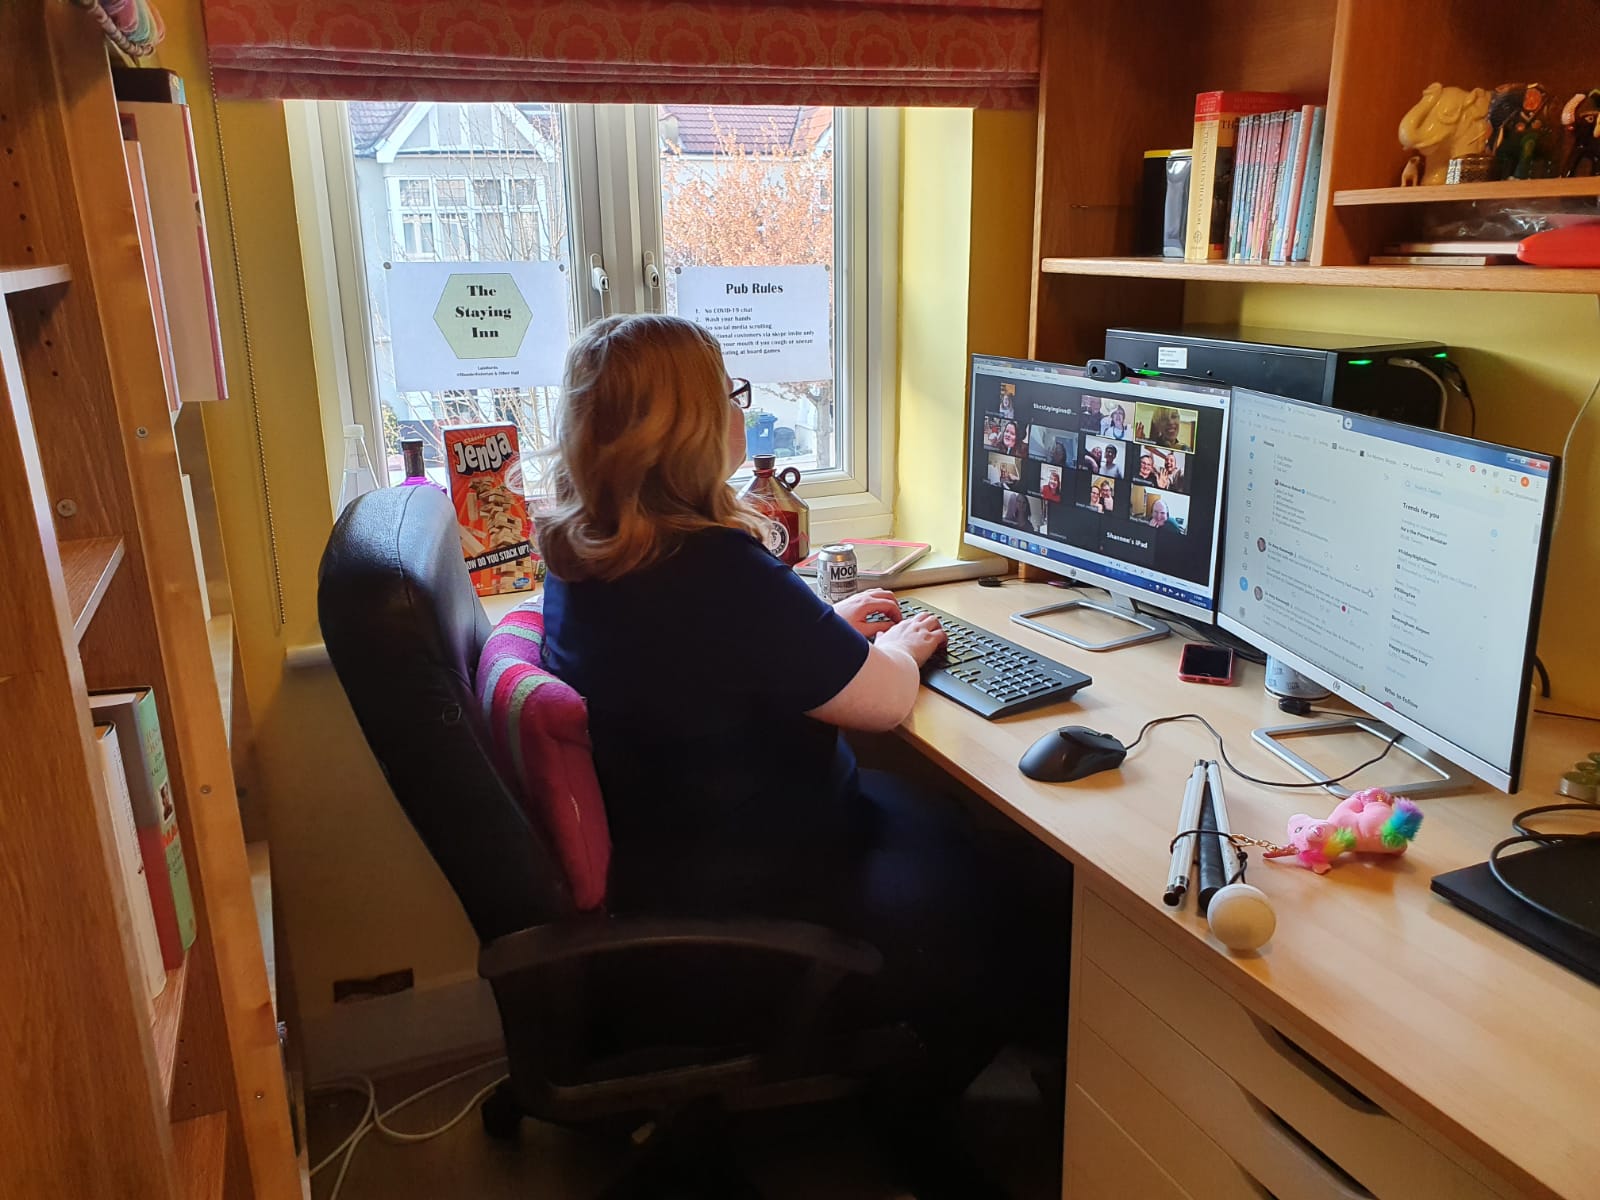 Dr Amy Kavanagh, a visually impaired activist, at her desk where she runs most of The Staying Inn's events